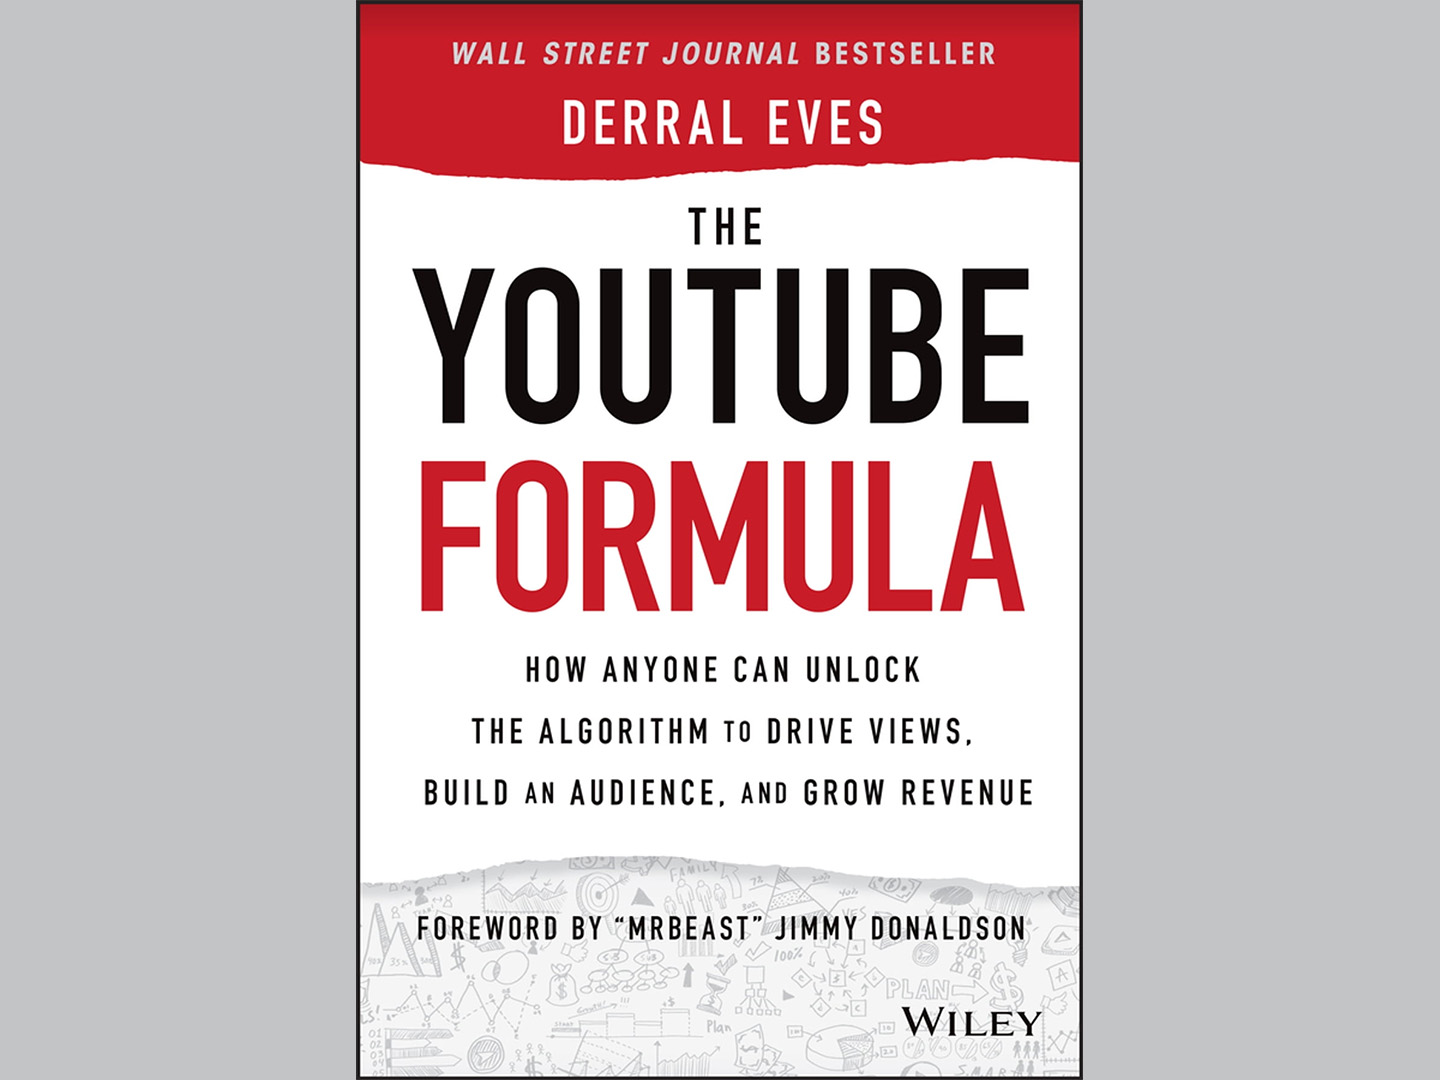 The YouTube Formula: How Anyone Can Unlock the Algorithm to Drive Views, Build an Audience, and Grow Revenue Book by Derral Eves